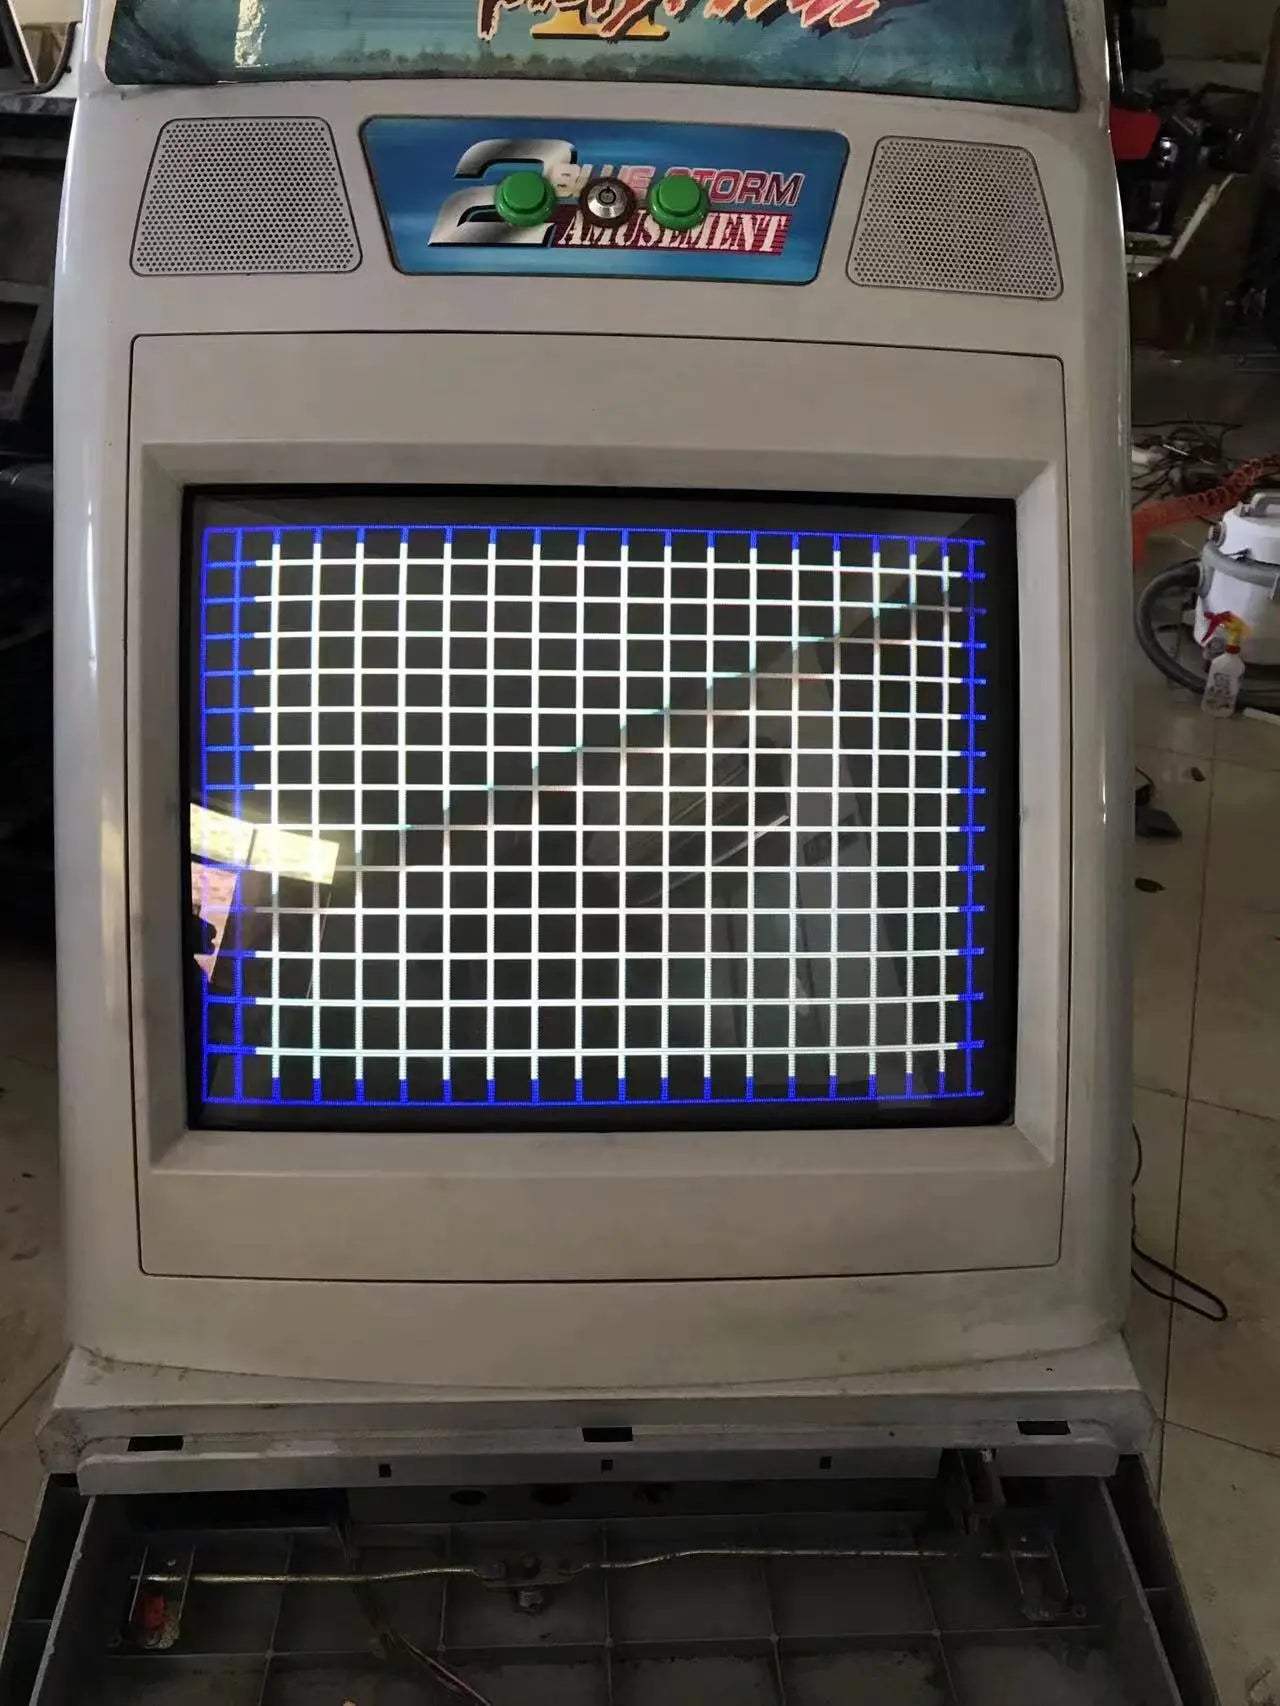 Rock-2-Playtime-Blue-Storm-Retro-Amusement-Coin-Operated-Video-Arcade-fighting-game-machine-Tomy-Arcade